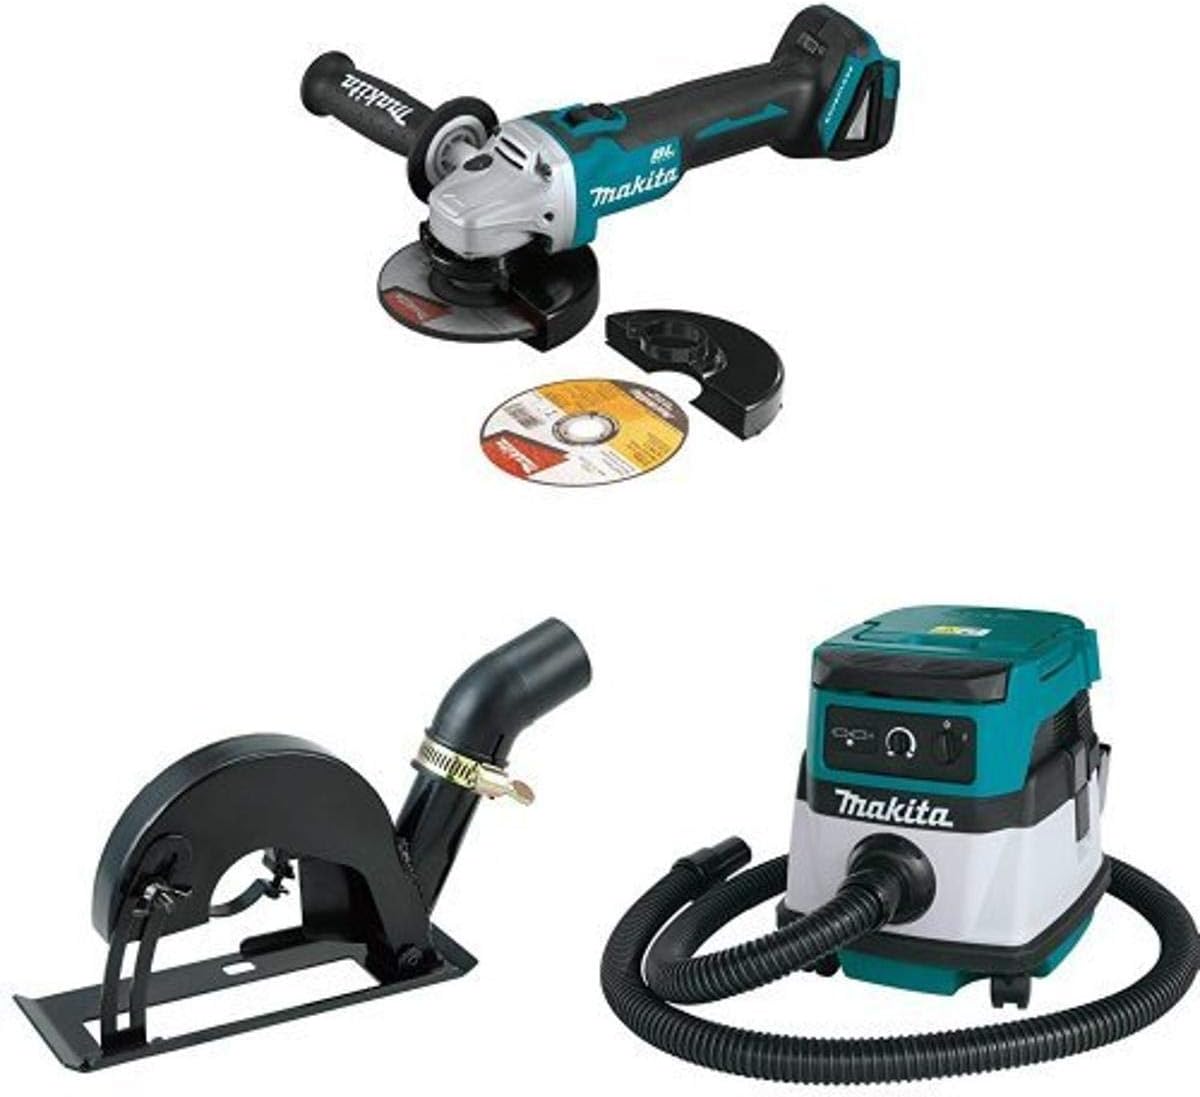 Makita XAG09Z 18V LXT Brushless 4-1/2-Inch - 5-Inch Cut-Off/Angle Grinder, 193794-5 Dust Extraction Cutting Guard,  XCV04Z 18V X2 LXT (36V) 2.1 Gallon HEPA Filter Dry Dust Extractor/Vacuum